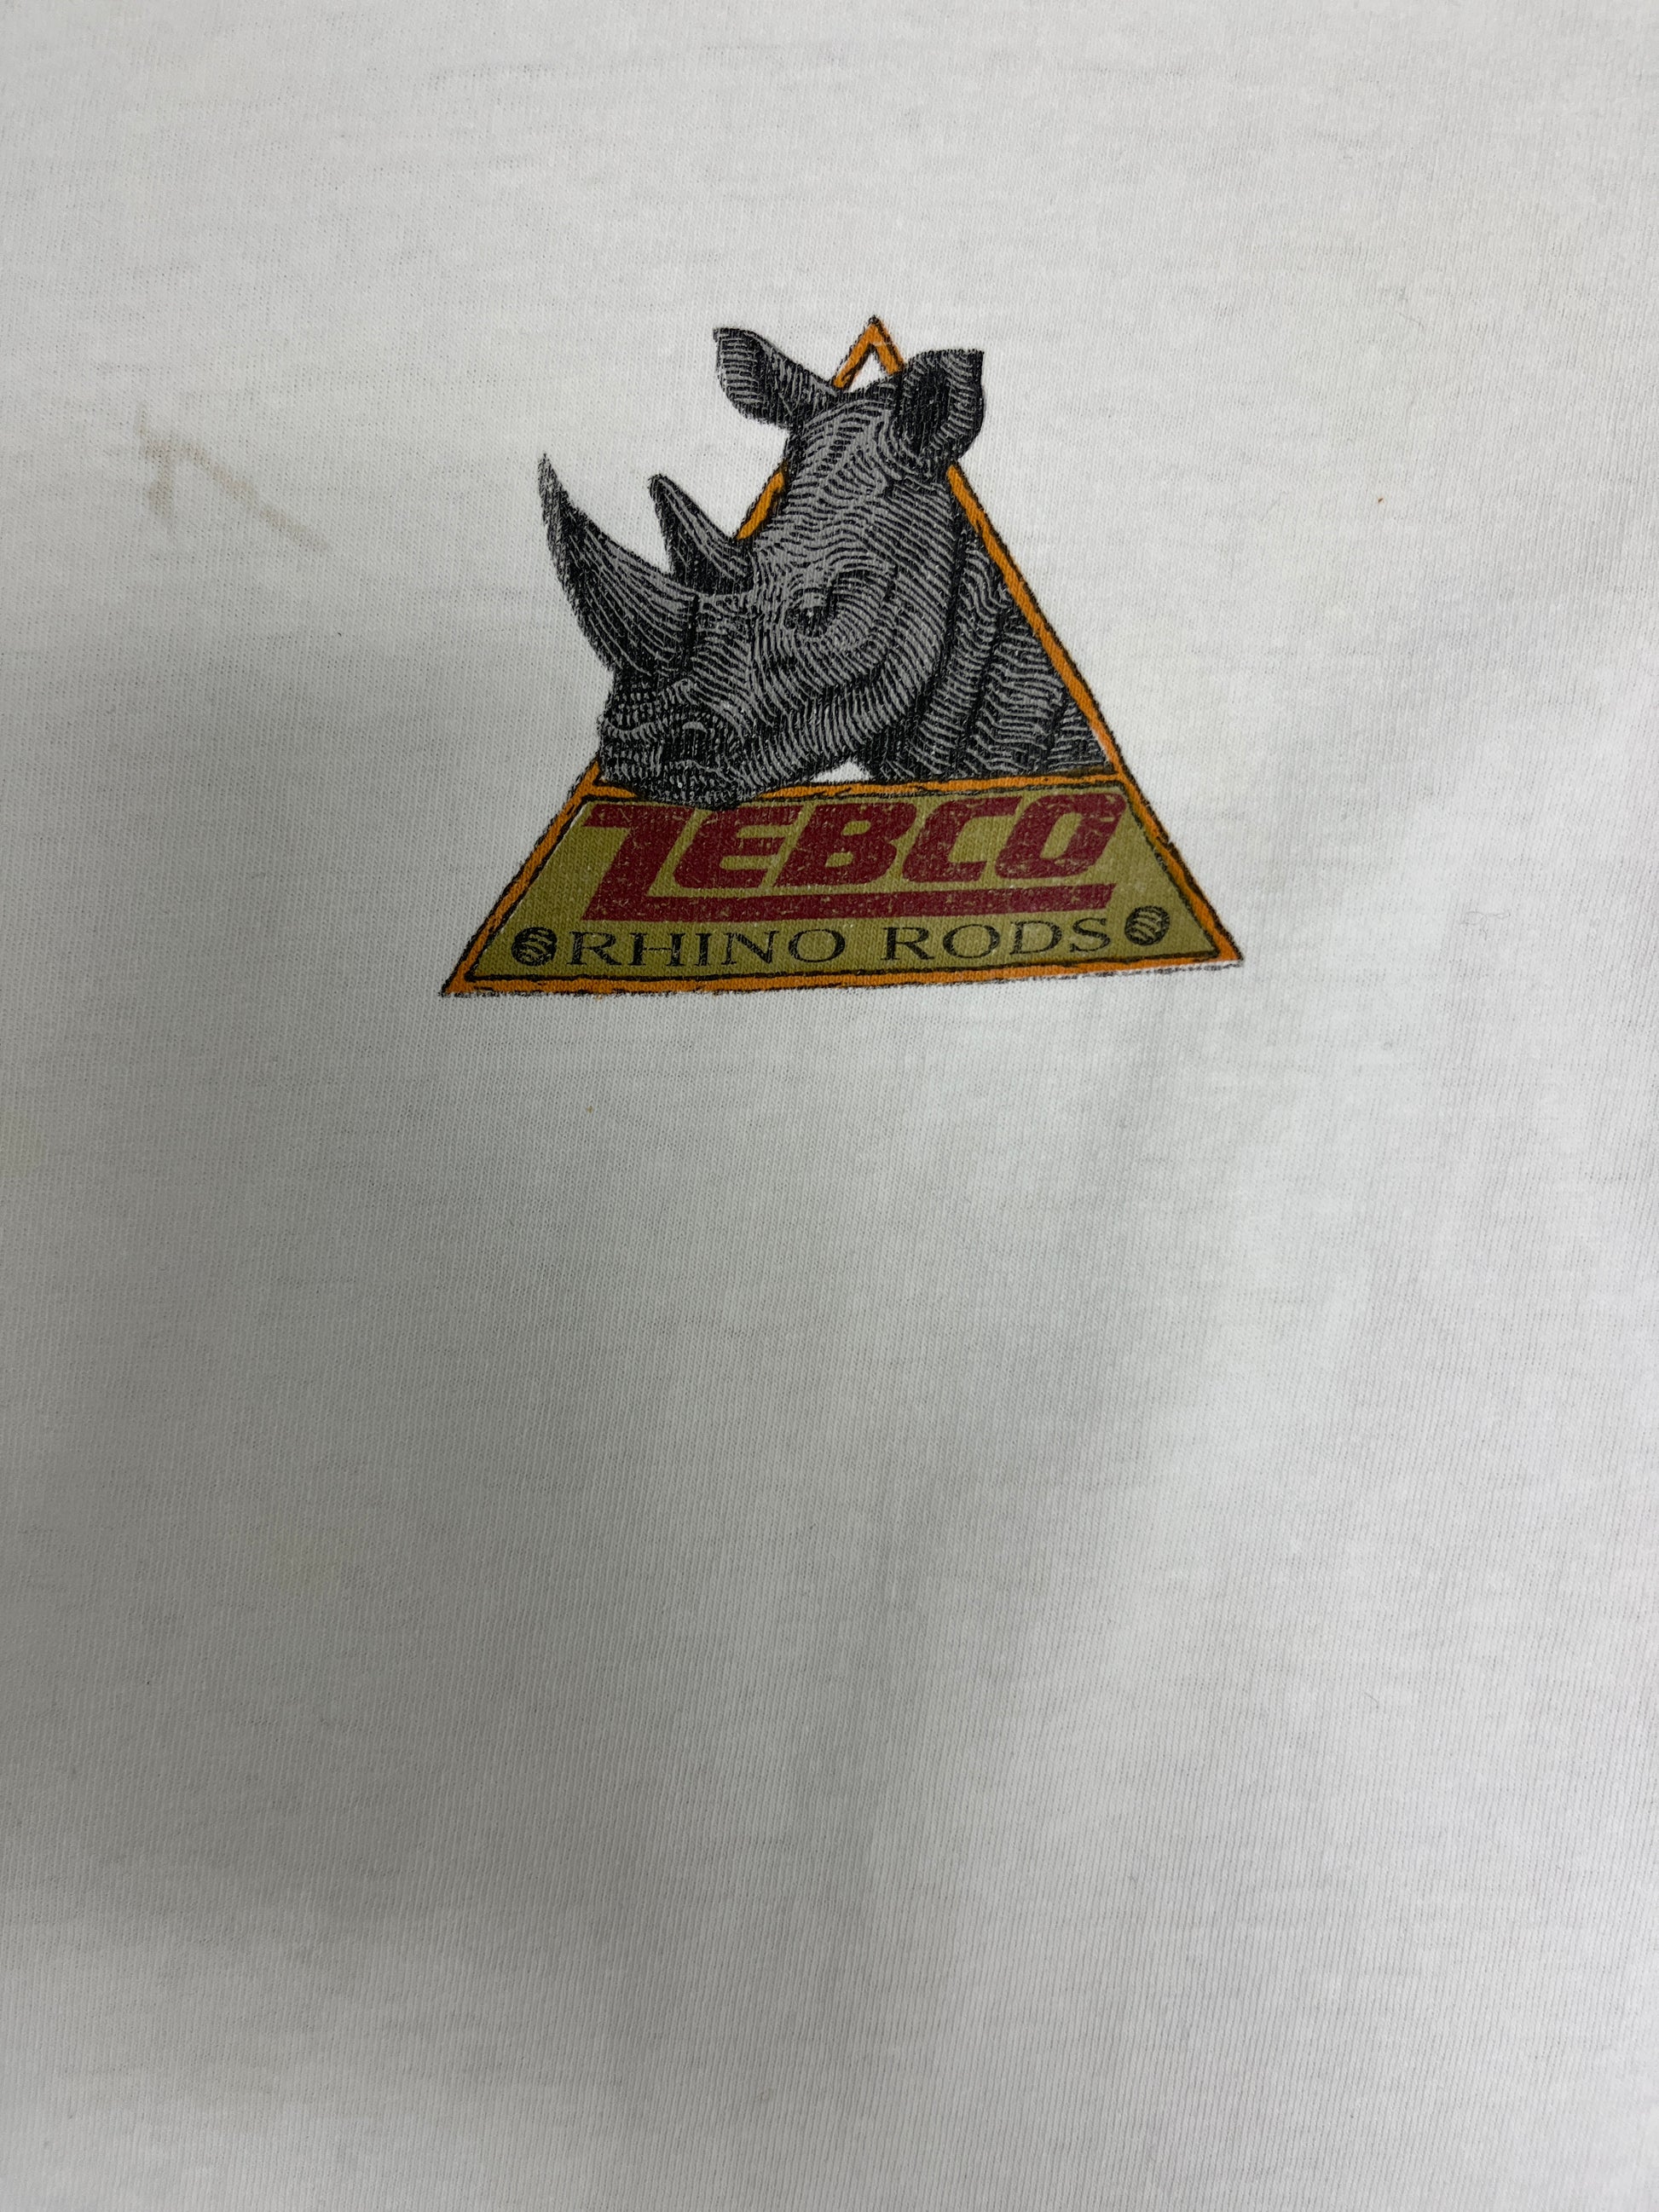 Zebco Rhino Rods Fishing Graphic Tee | Size Large | Vintage 1990s Distressed Promotional White T-Shirt | Made in USA 